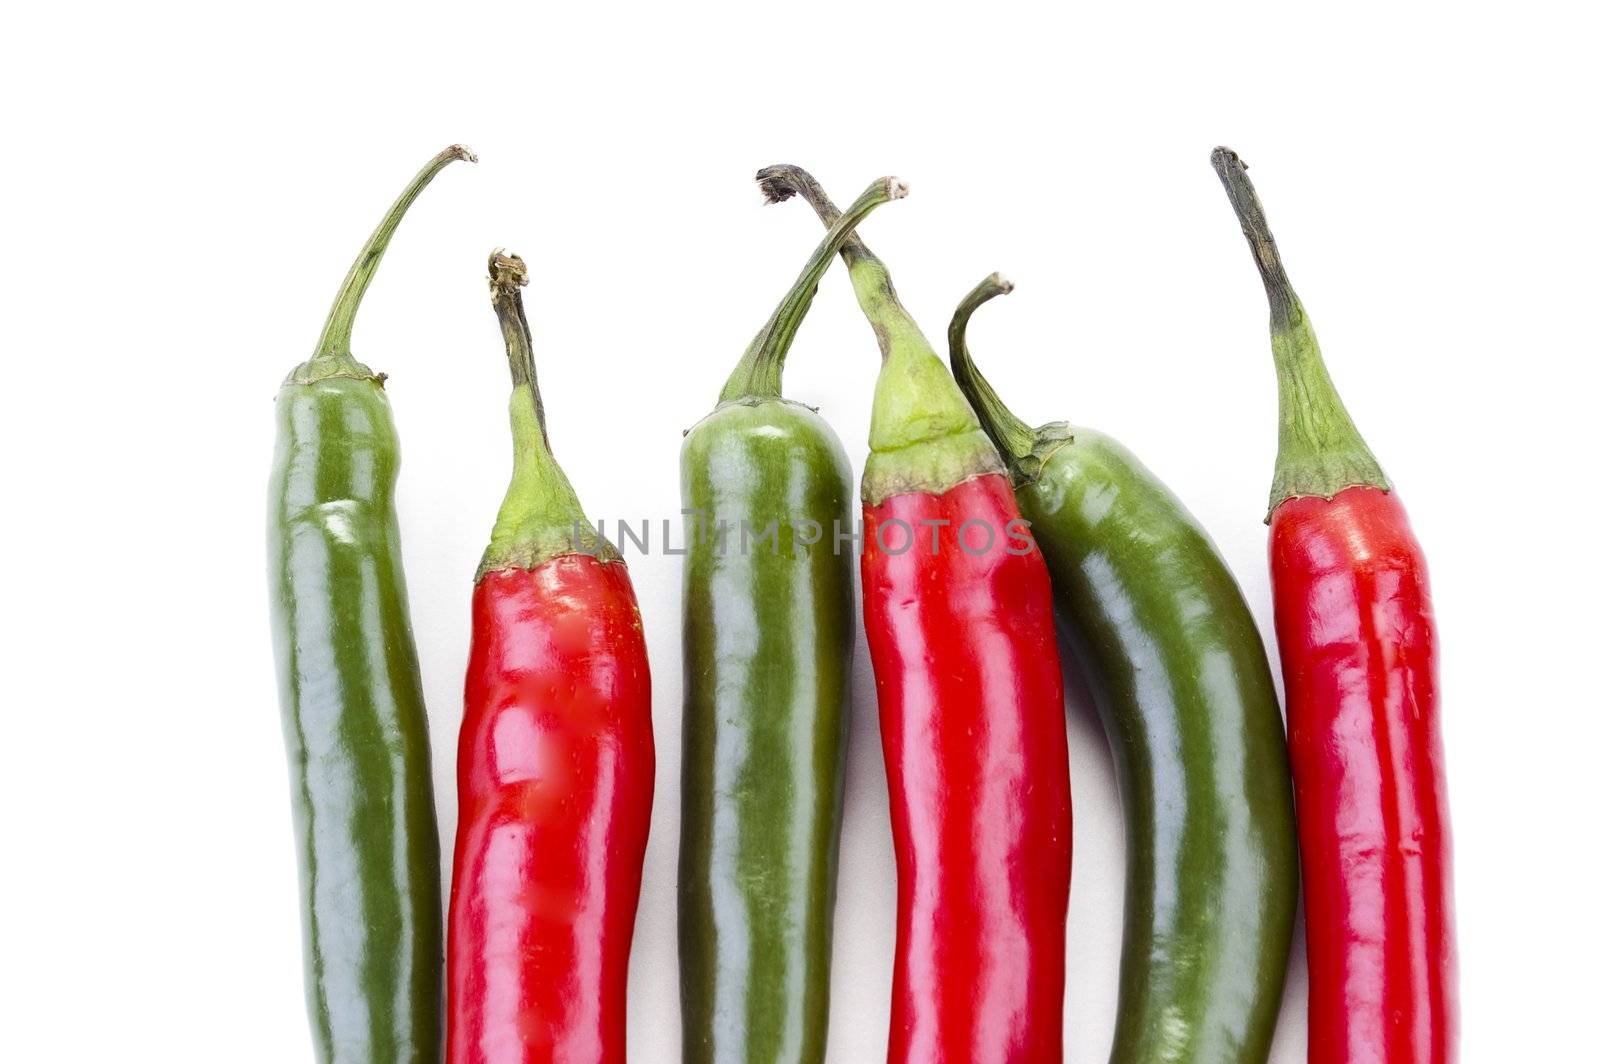 a series of green and red chili peppers